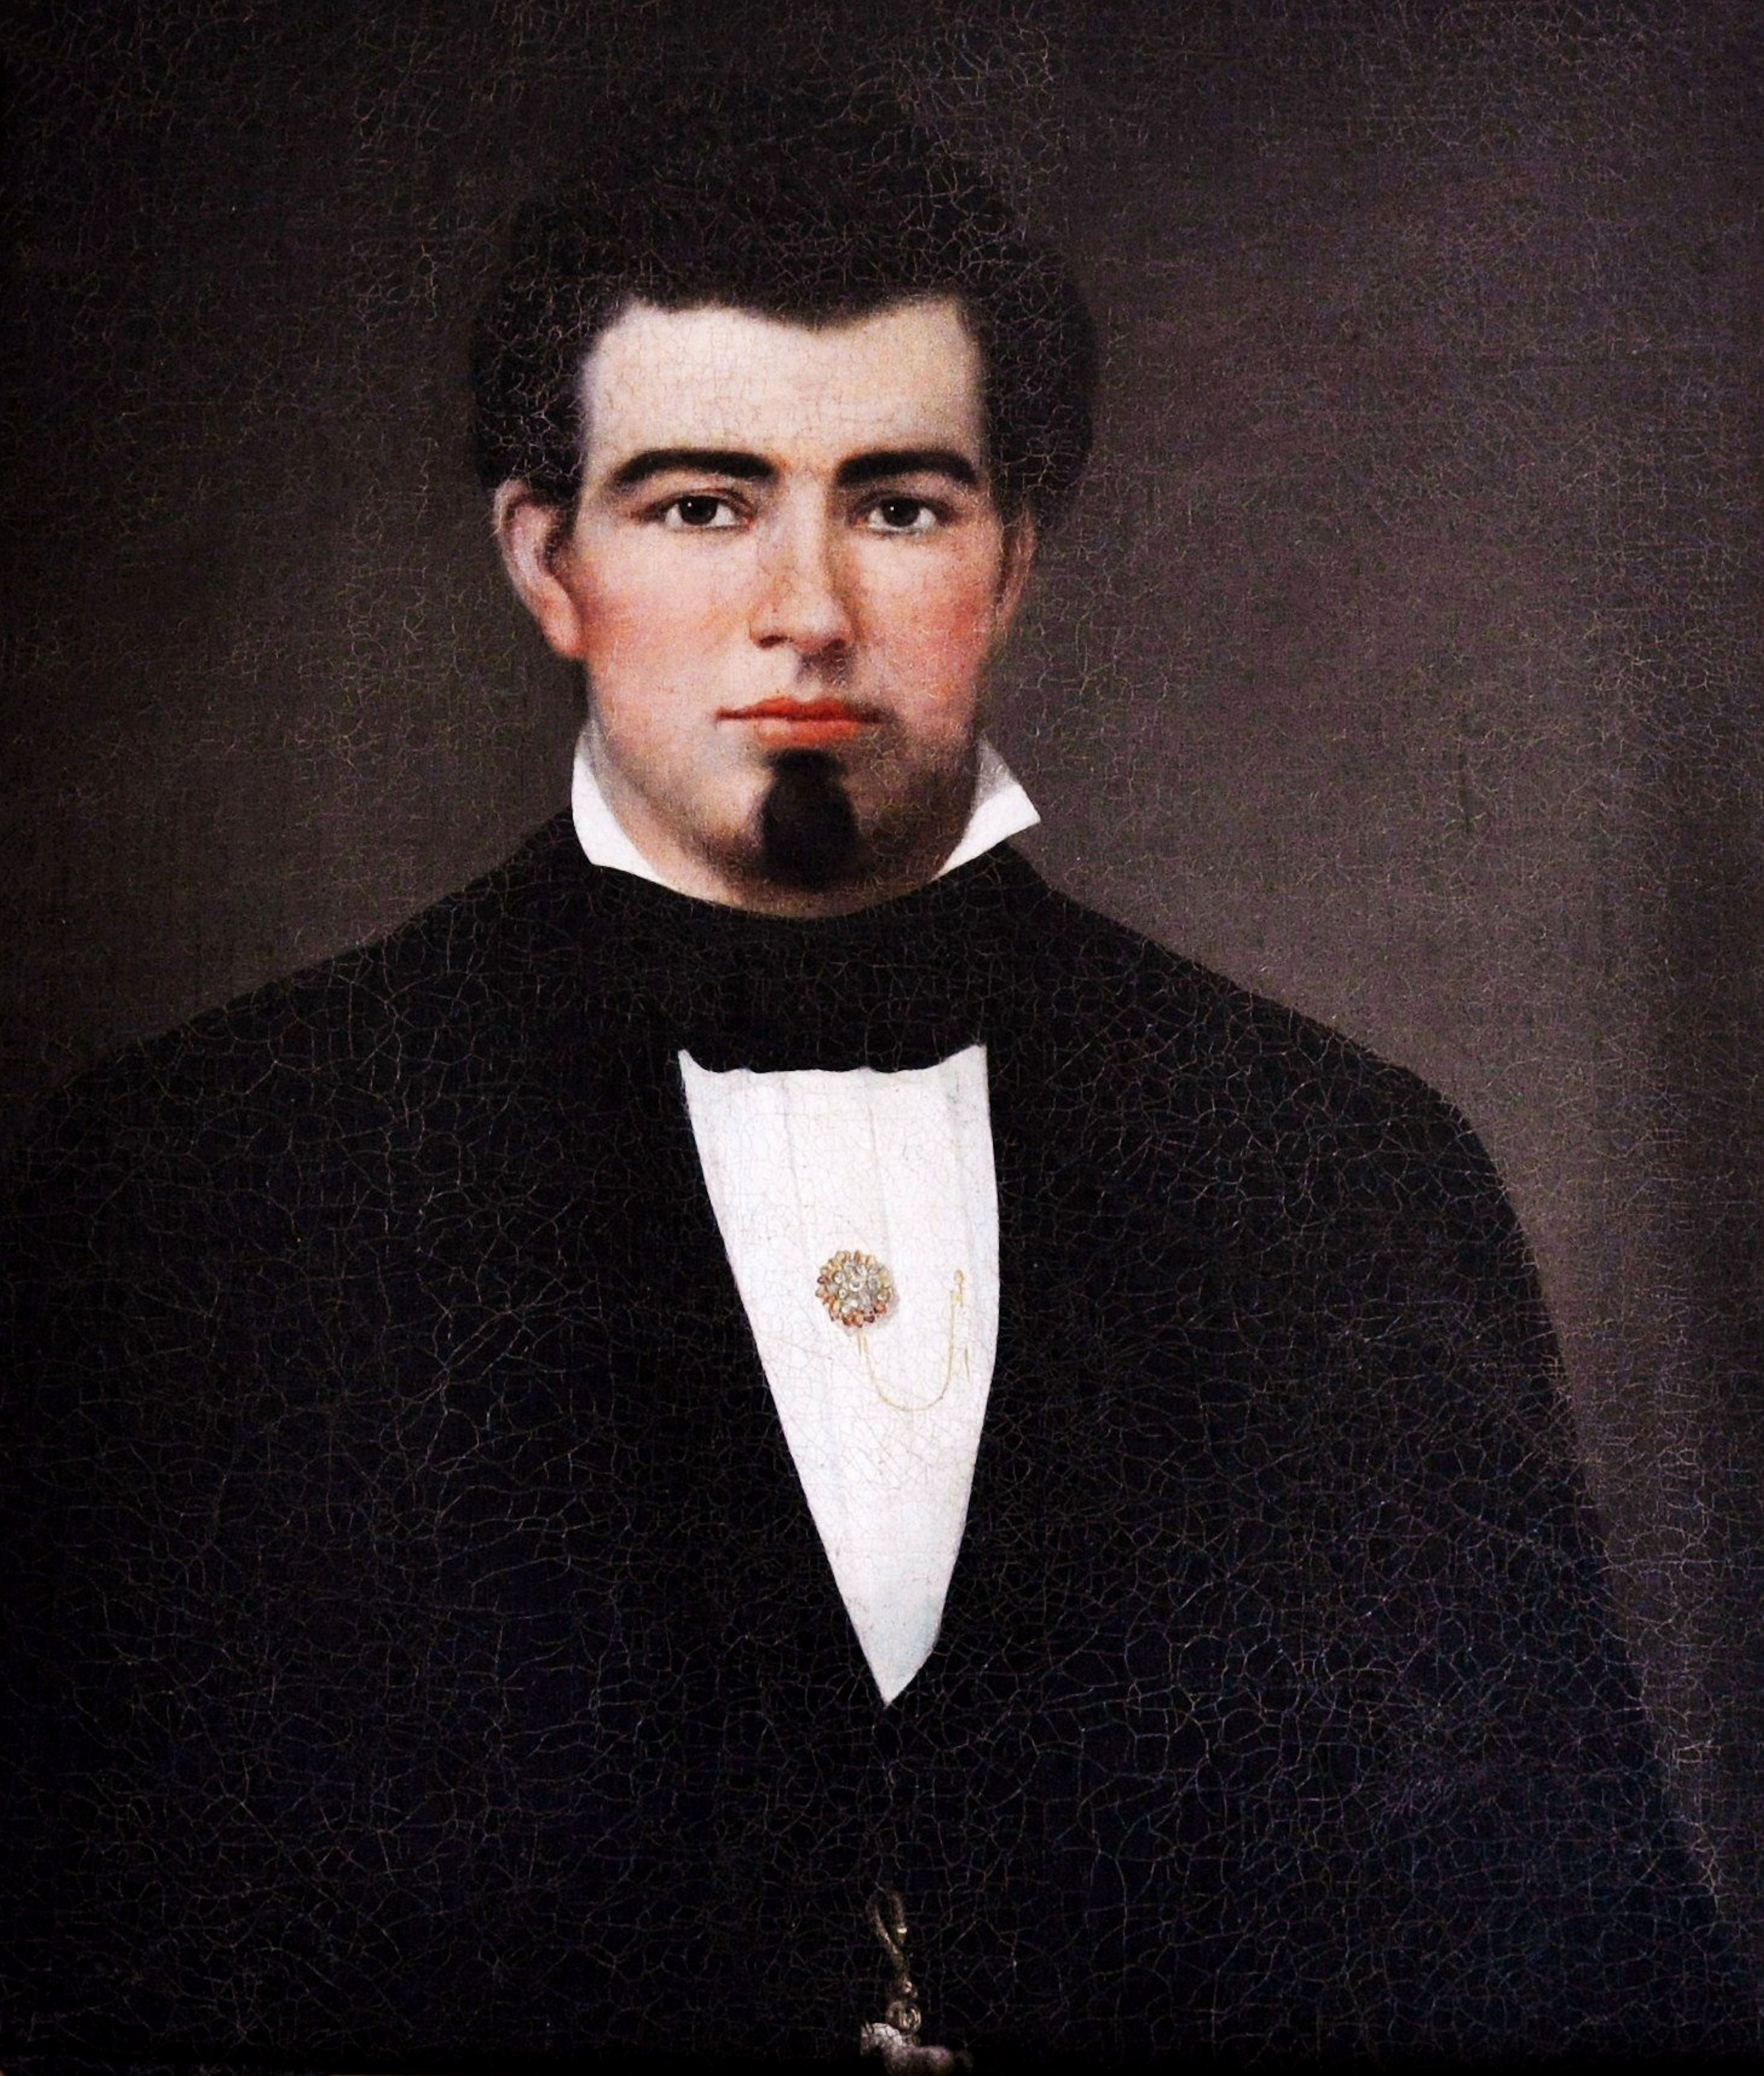 Portrait of John Morrissey on exhibit at his Canfield Casino in Saratoga Springs, N.Y (Saratoga Springs History Museum)